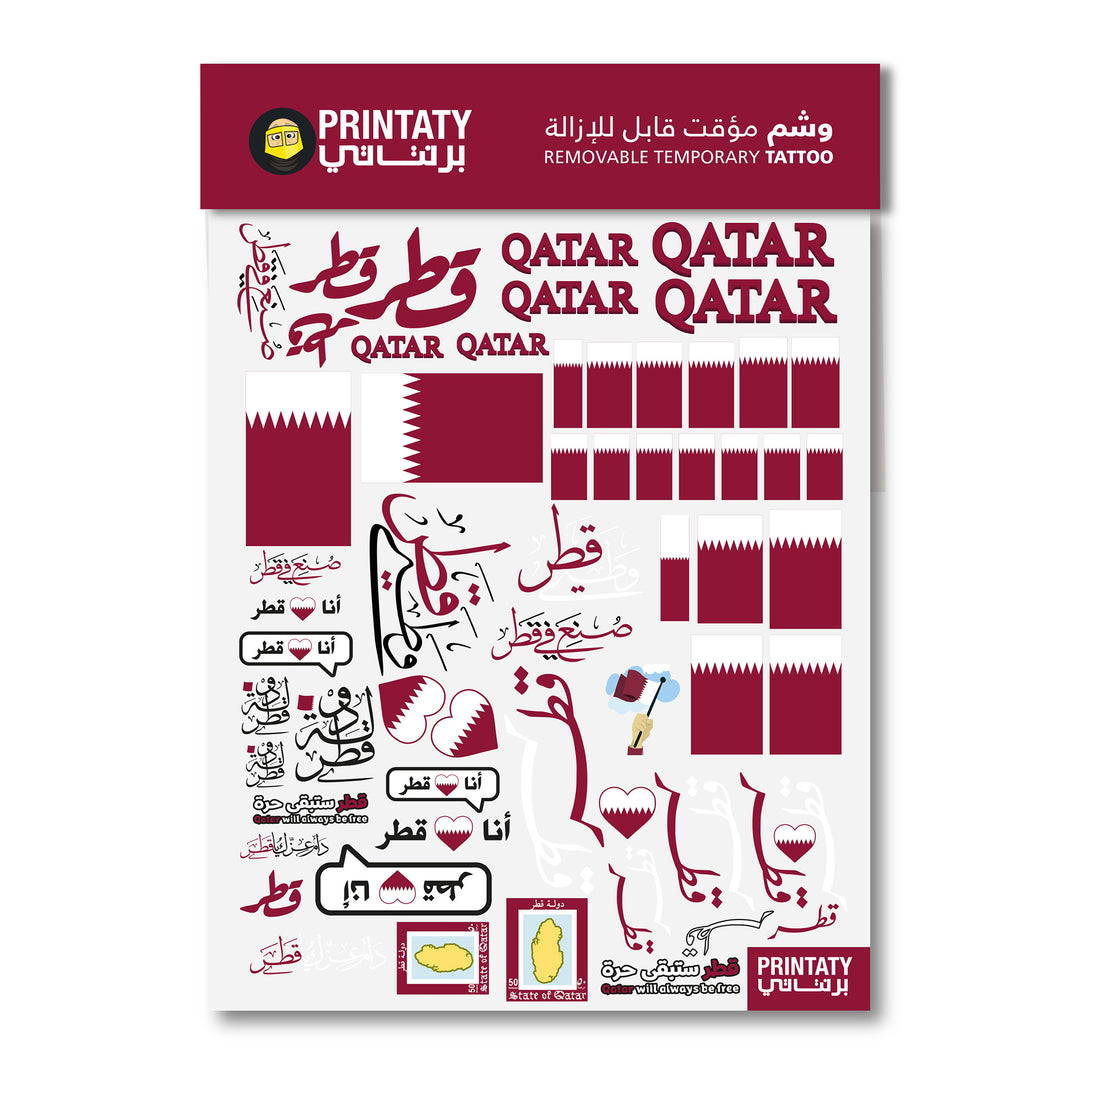 65 removable temporary tattoos (special version for Qatar)